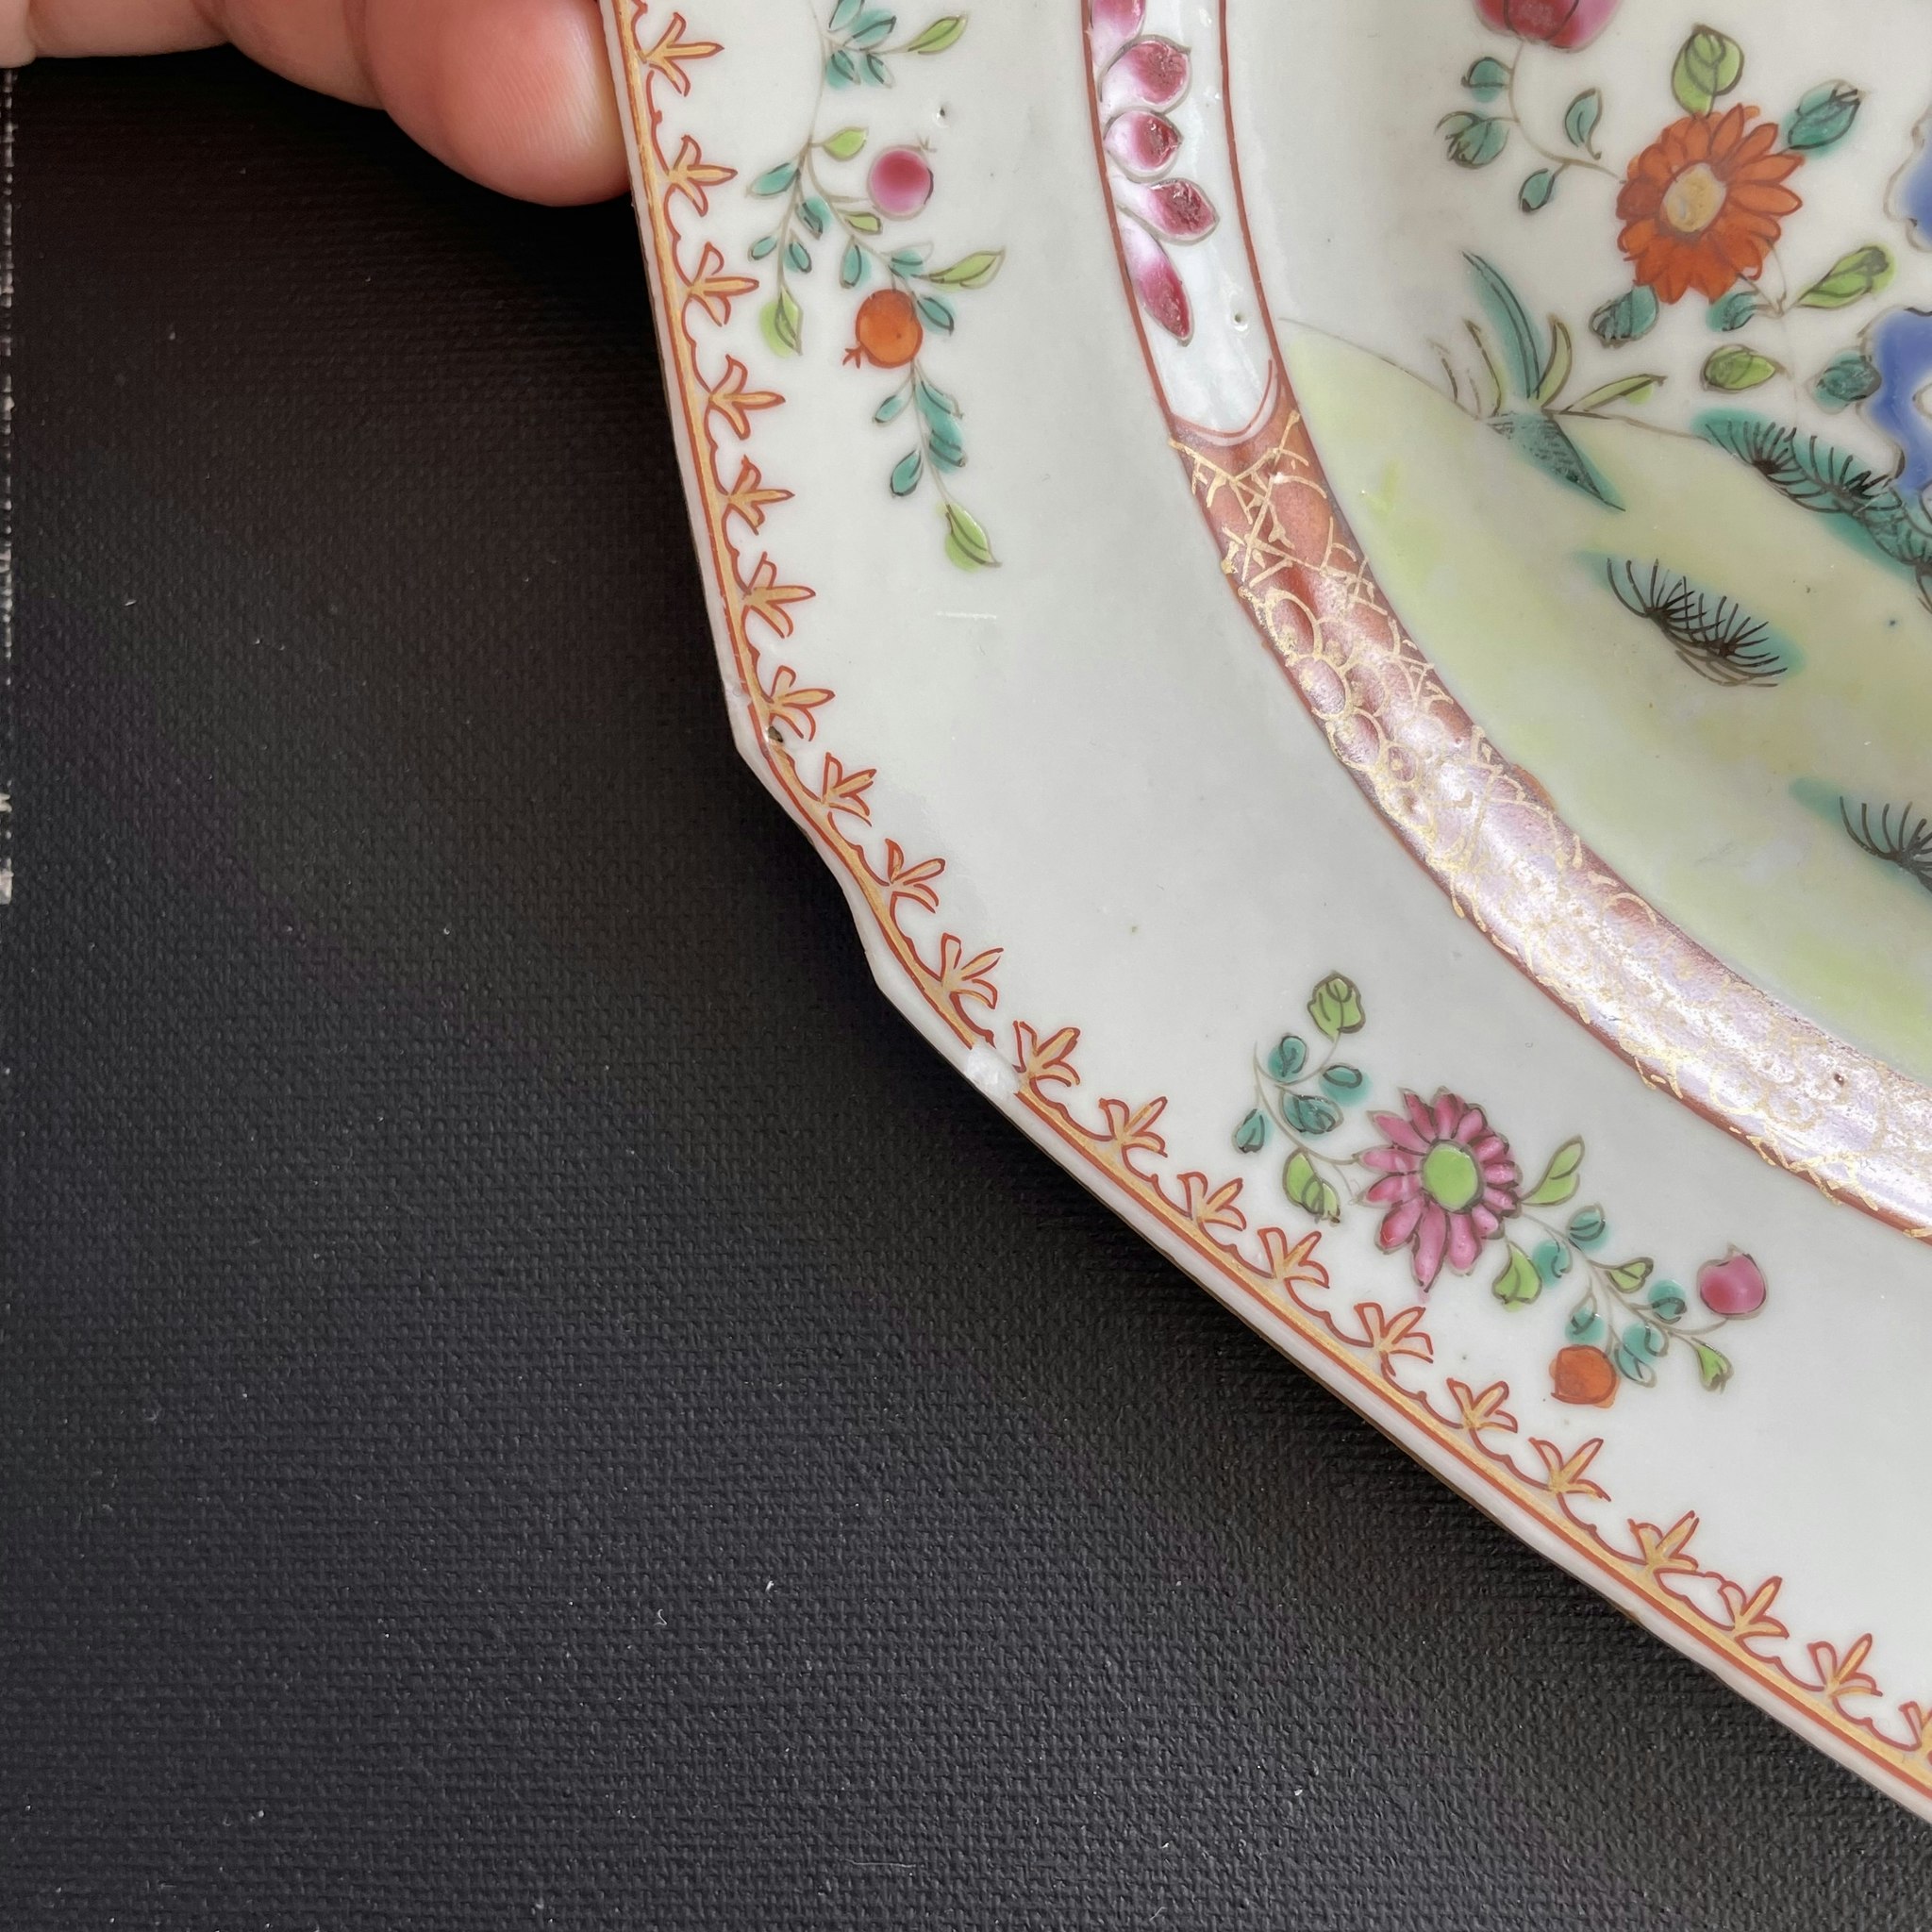 Chinese Antique famille rose plate, Qianlong, 18th c #1547